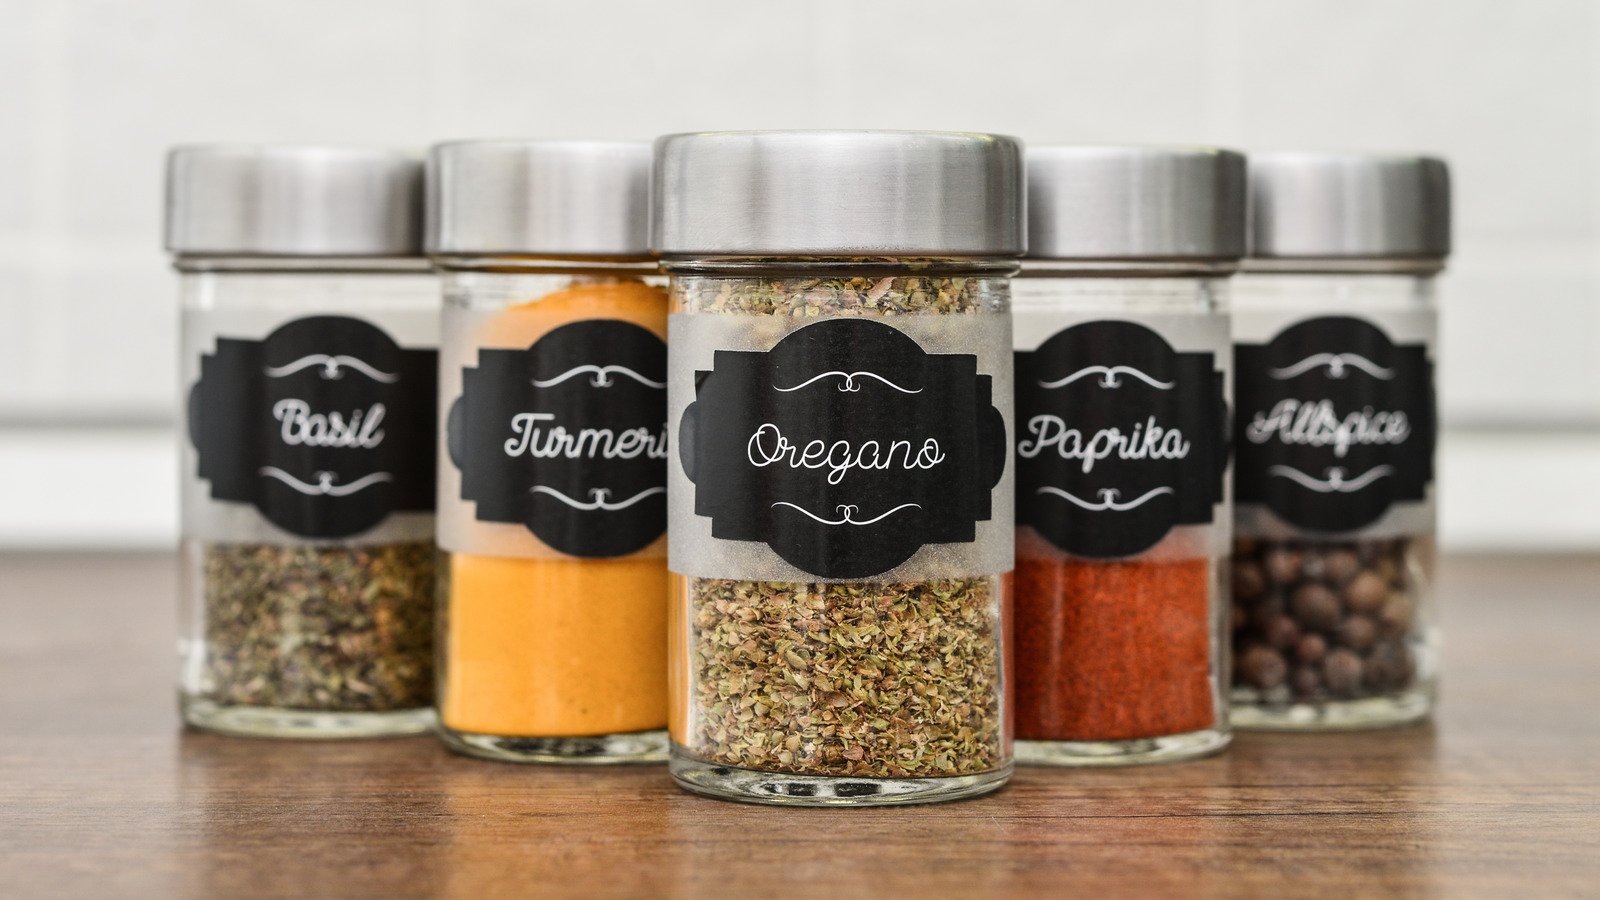 https://www.housedigest.com/img/gallery/upgrade-your-kitchen-organization-with-these-diy-magnetic-spice-jars/l-intro-1703858171.jpg